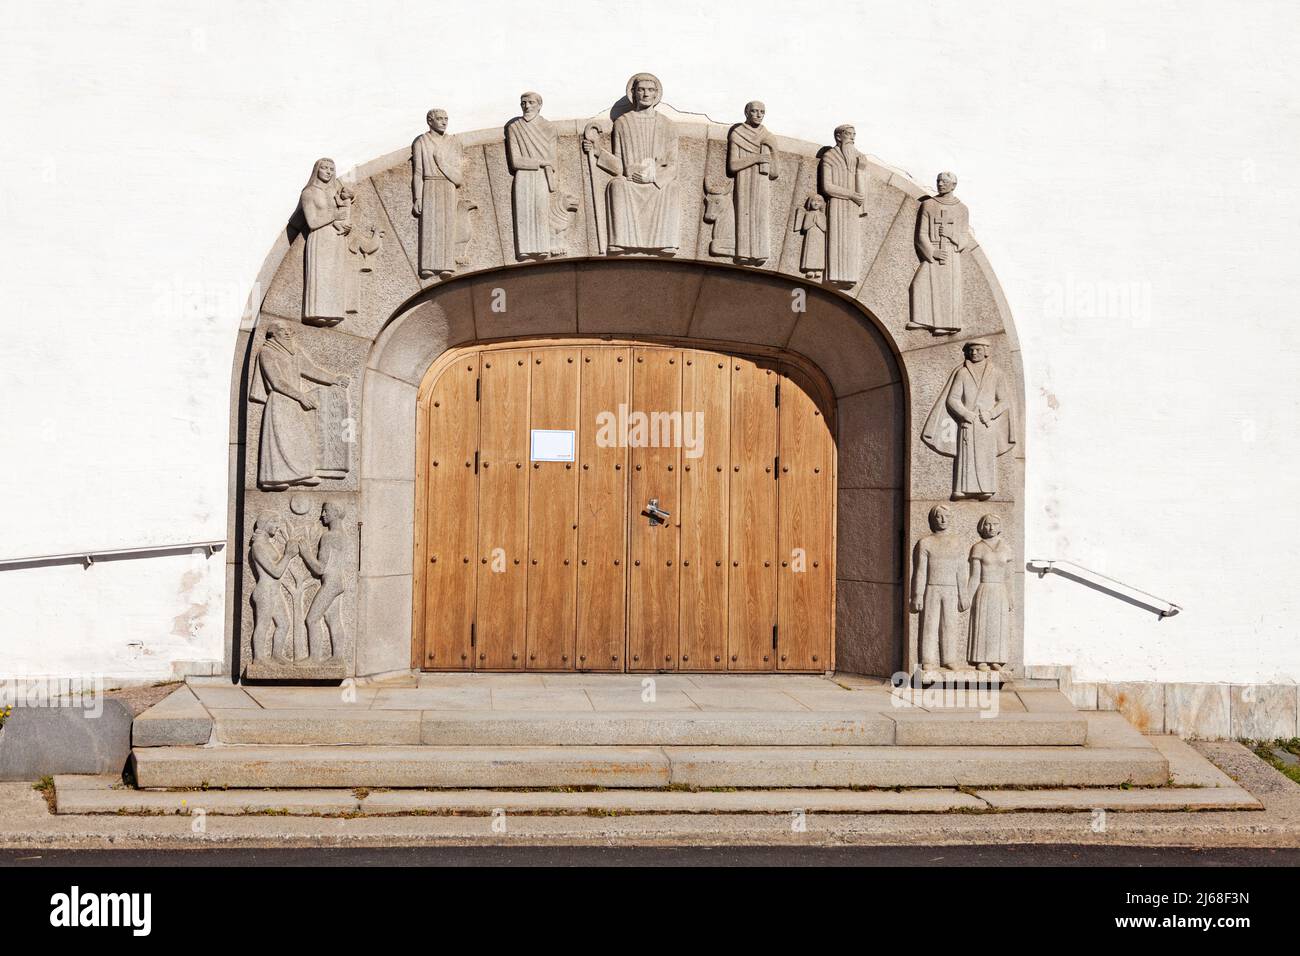 Vannas, Norrland Sweden - August 7, 2021: church gate with interesting stone figures in relief Stock Photo